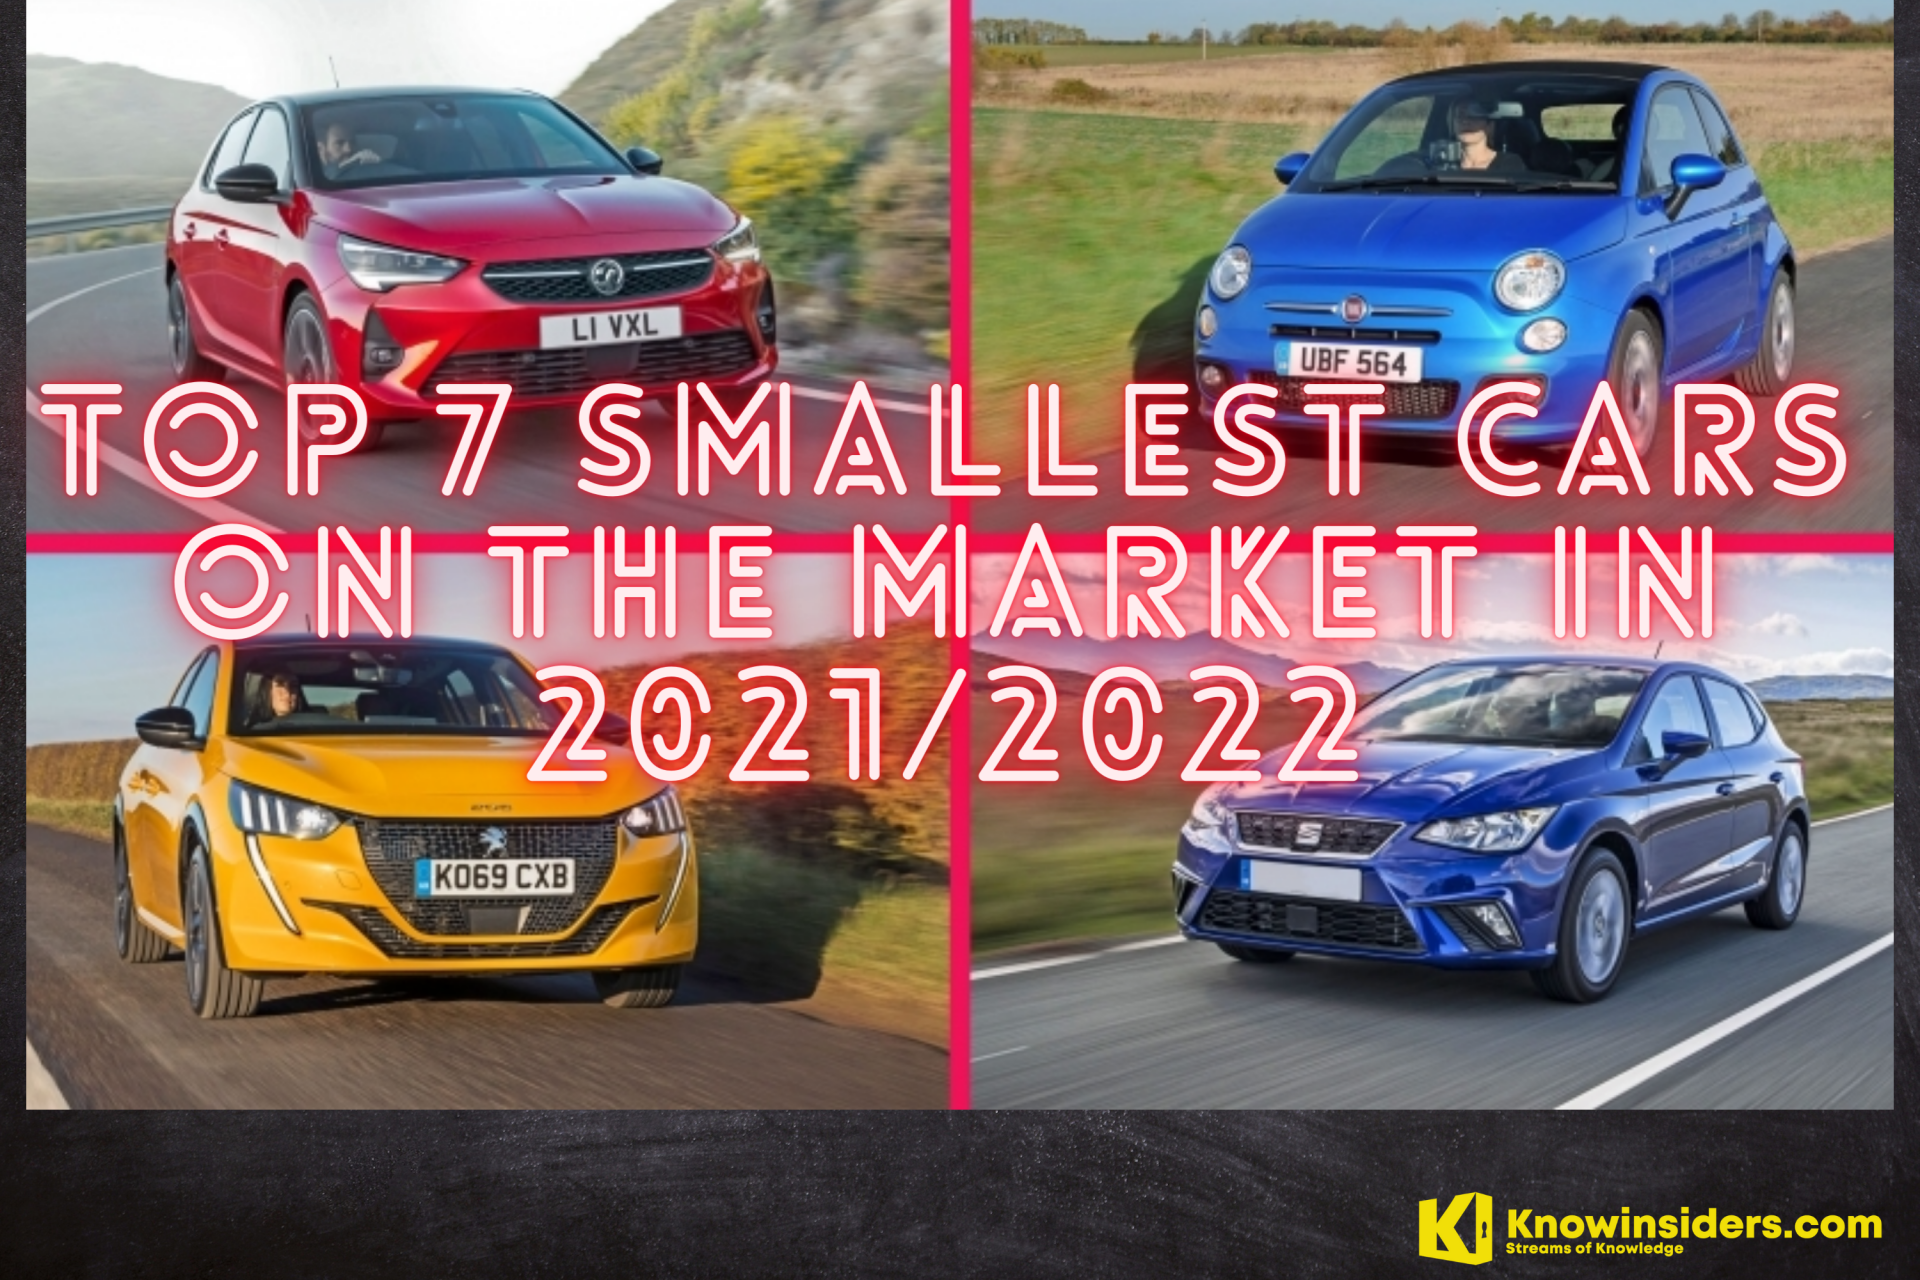 Top 7 Smallest Cars on the Market in 2021/2022